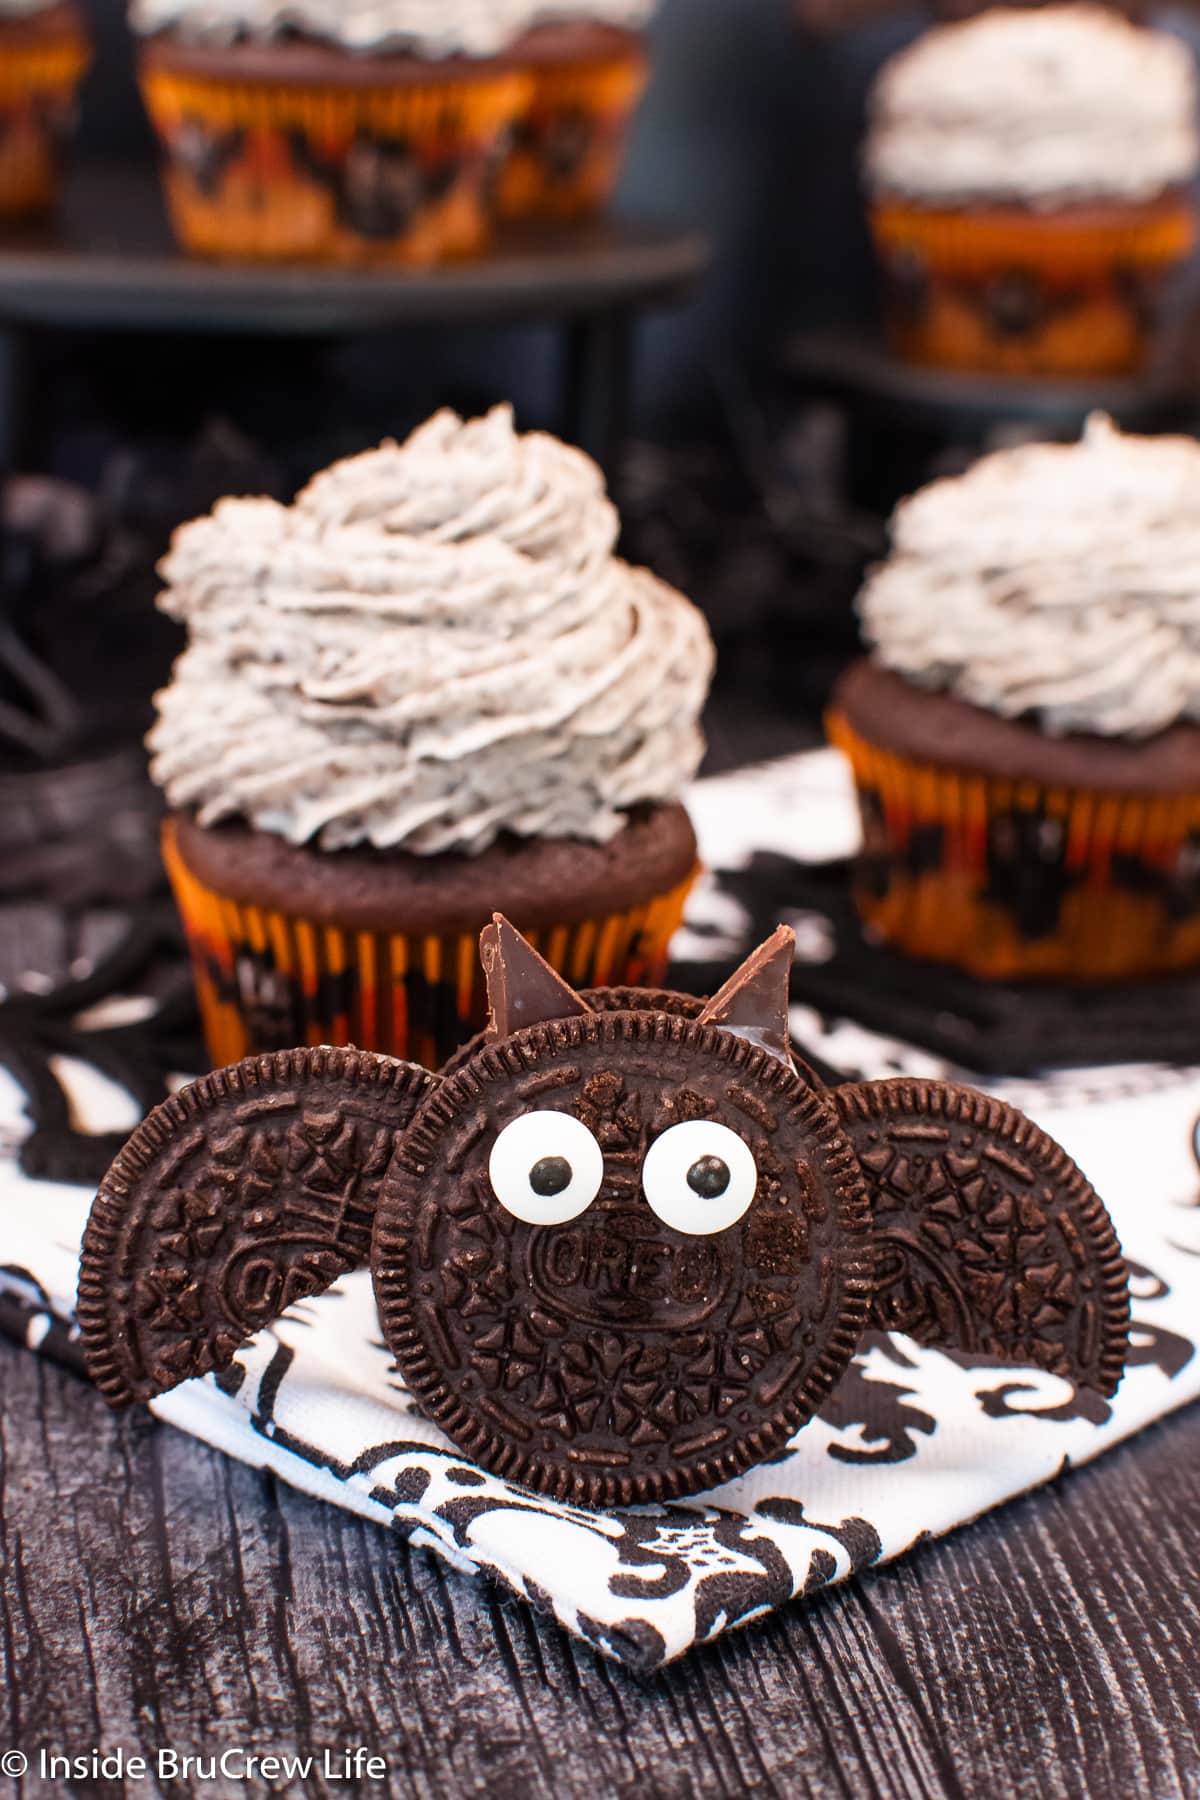 An Oreo cookie decorated like a bat with wings beside a cupcake.